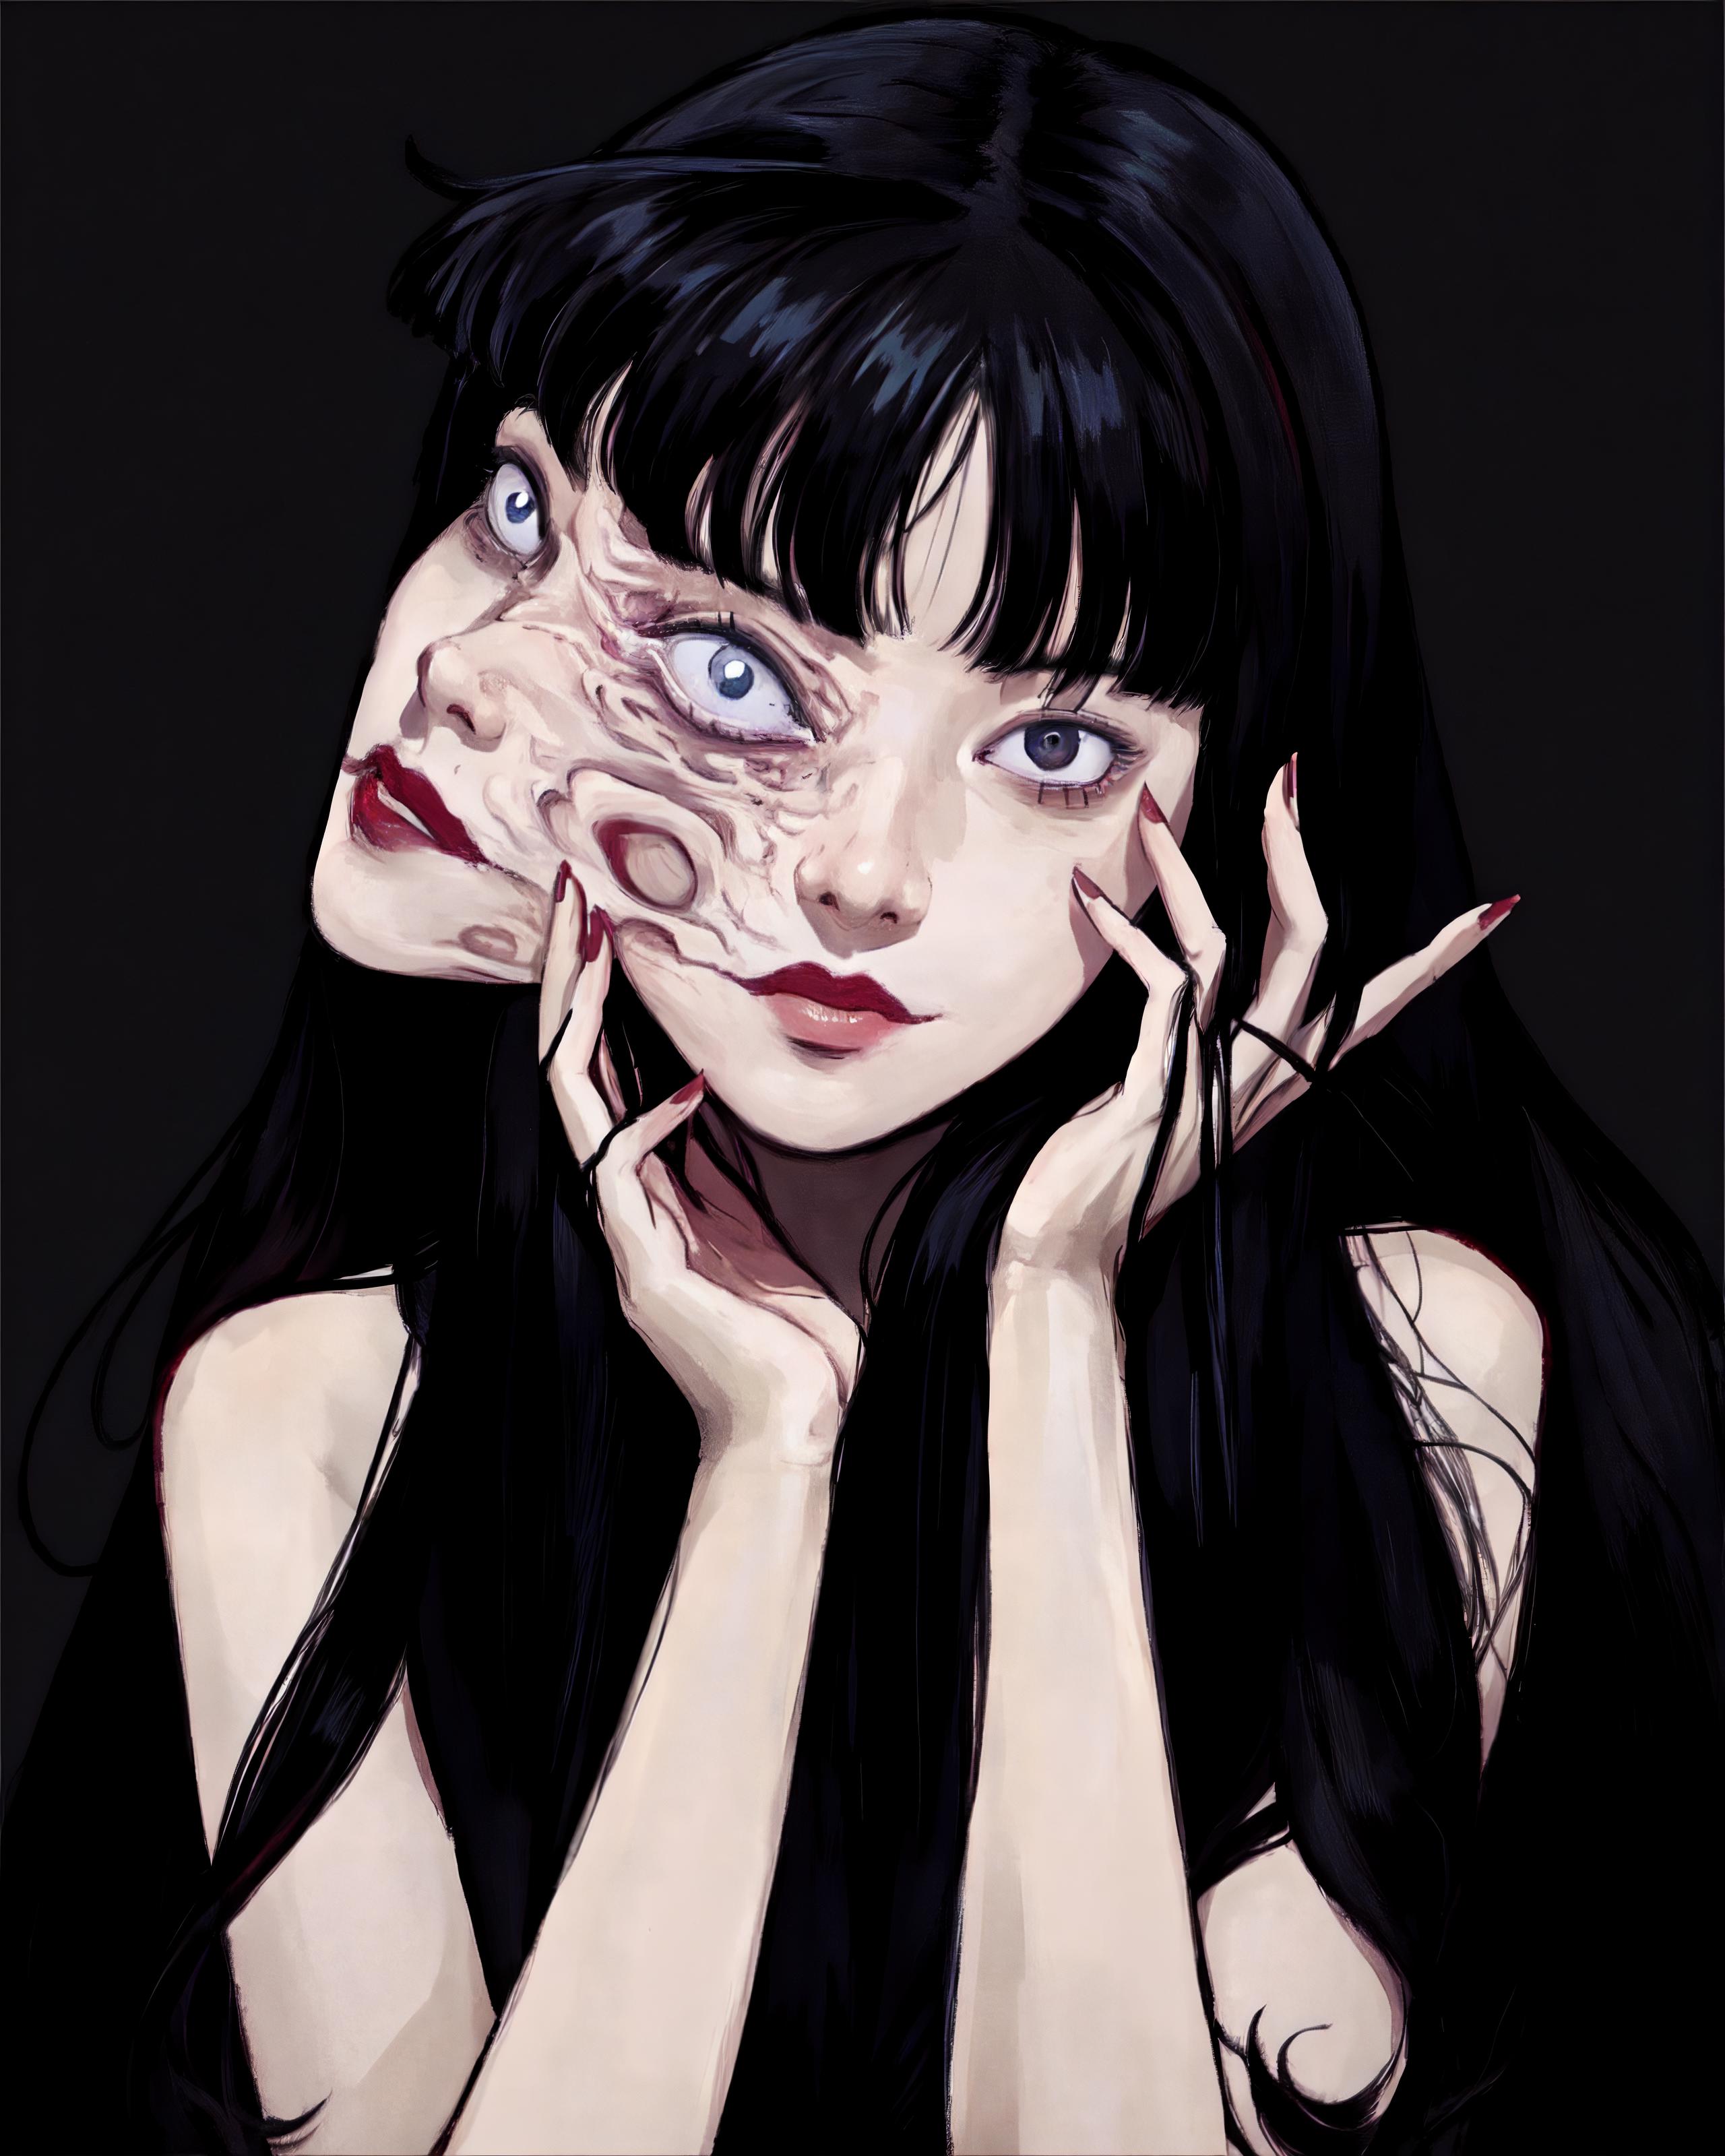 An anime drawing of a girl with a unique face.